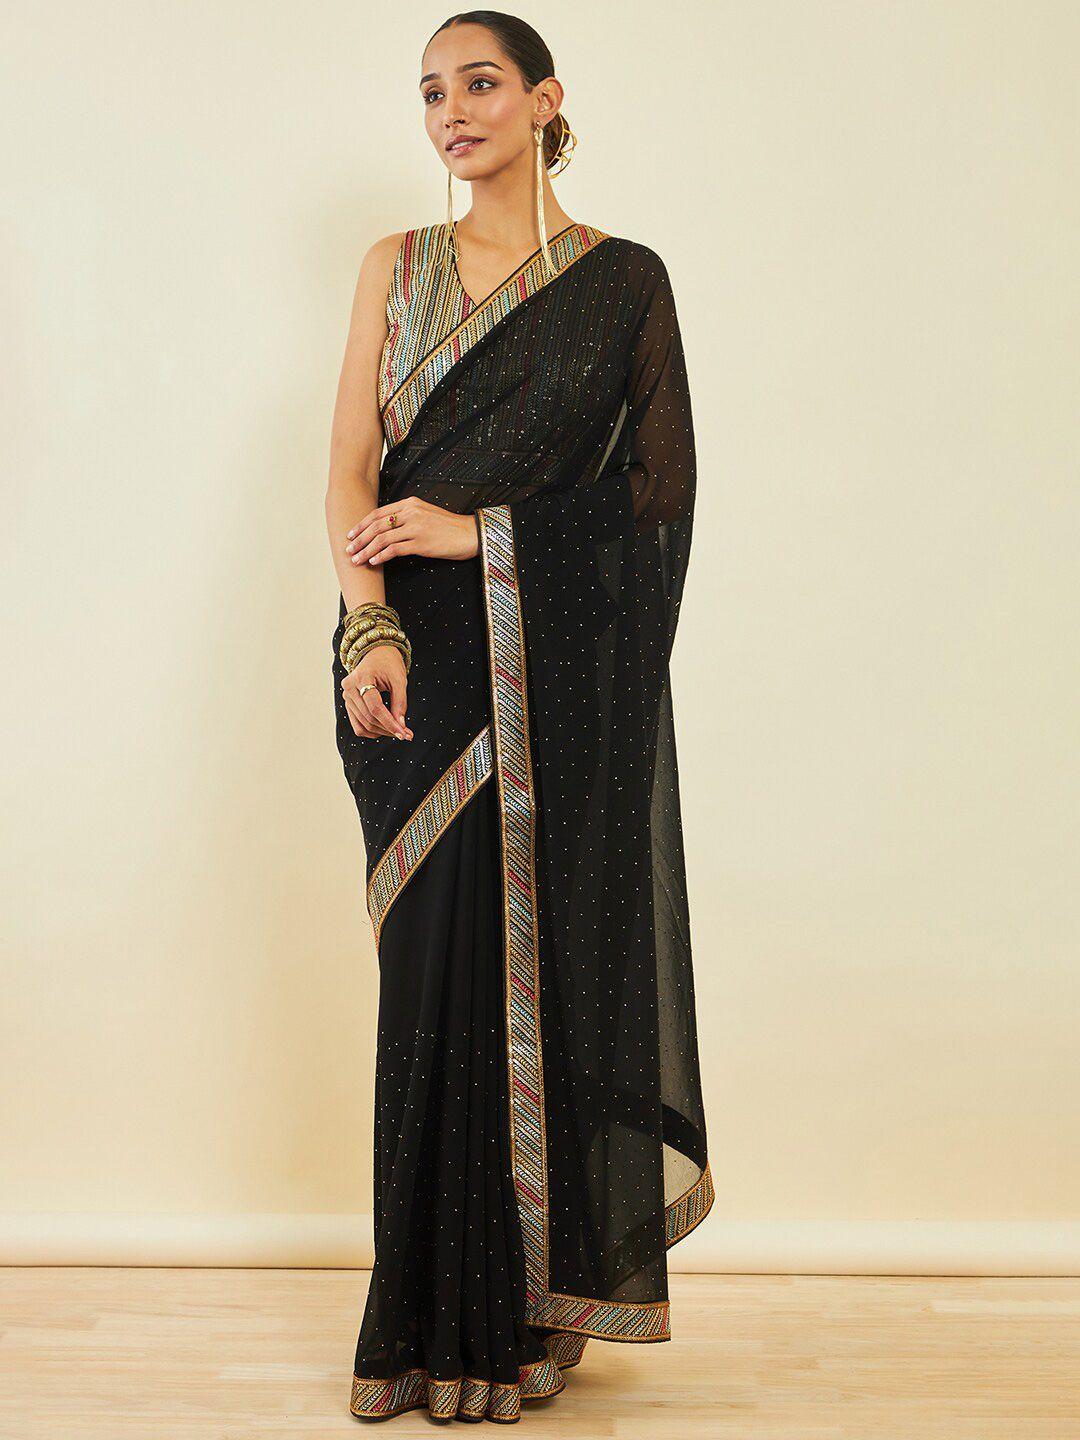 soch-embellished-beads-and-stones-saree